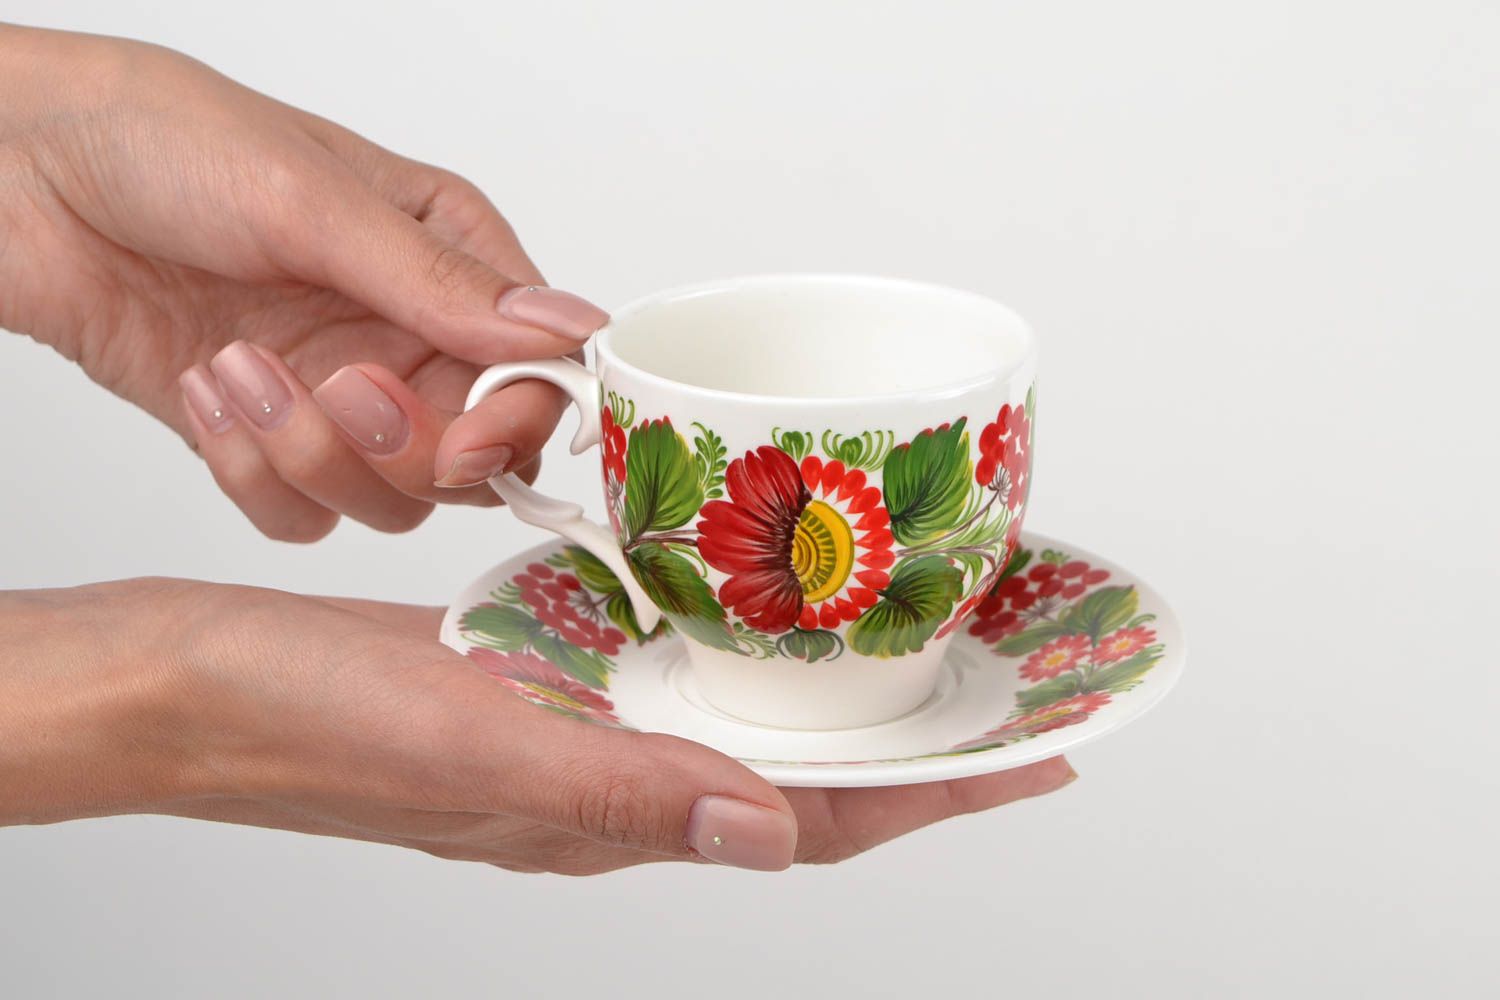 8 oz white porcelain teacup in bright floral red and green colors with handle and saucer photo 2